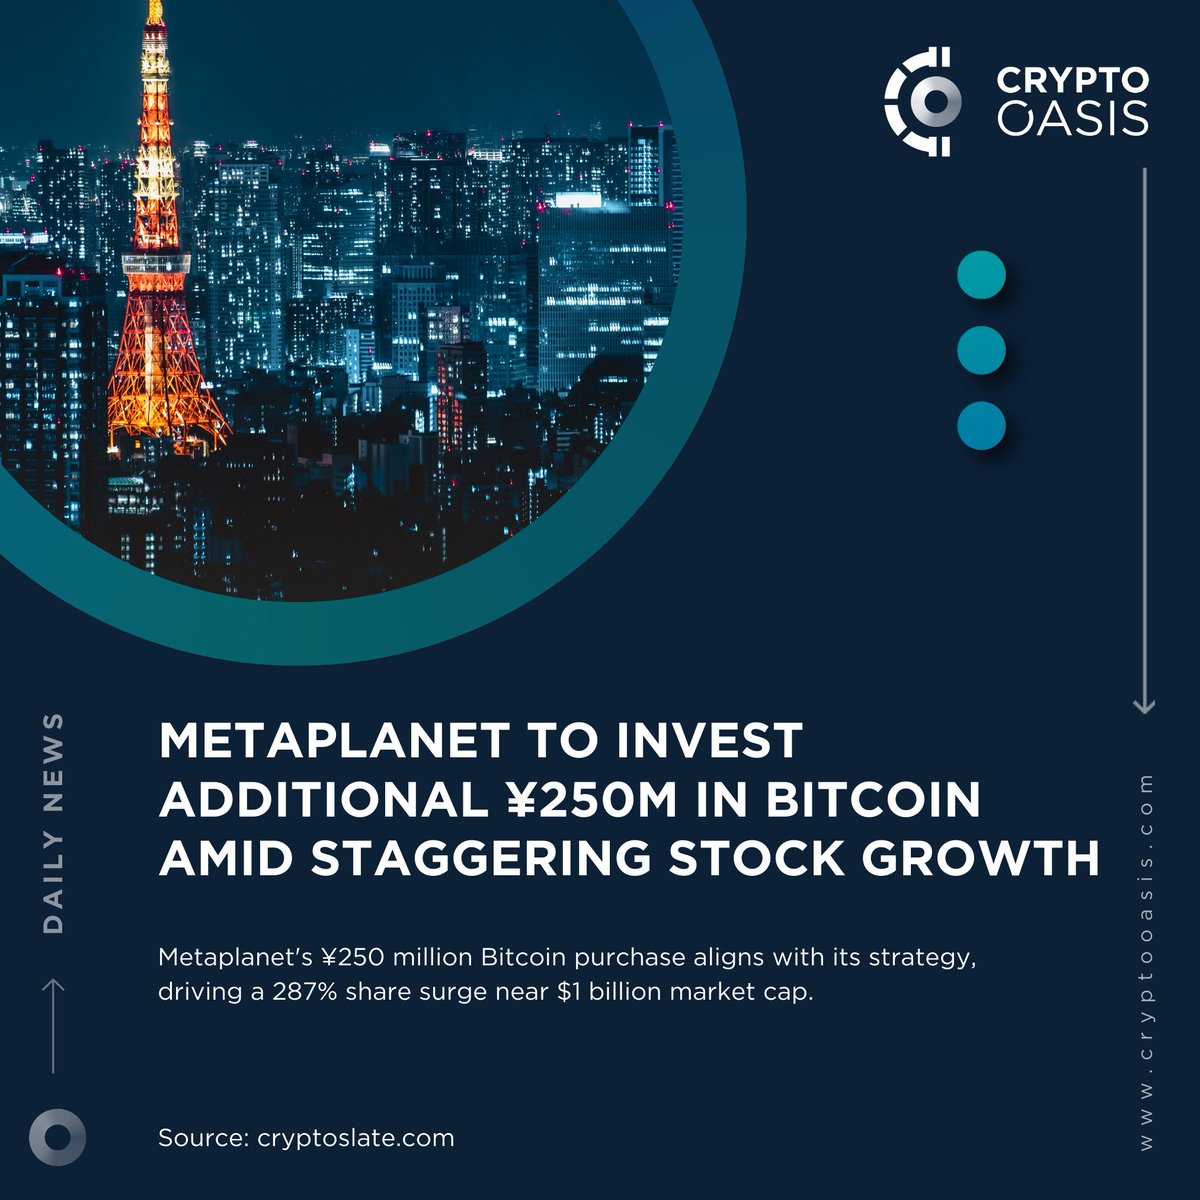 📢 Crypto Oasis Daily News Japan-based @Metaplanet_JP plans to buy an additional ¥250M of #Bitcoin, boosting its holdings to 117.72 $BTC valued at ¥1.2B. Approved by the board, this move aligns with #Metaplanet’s Bitcoin-first strategy. tinyurl.com/5adj9dbf @CryptoSlate